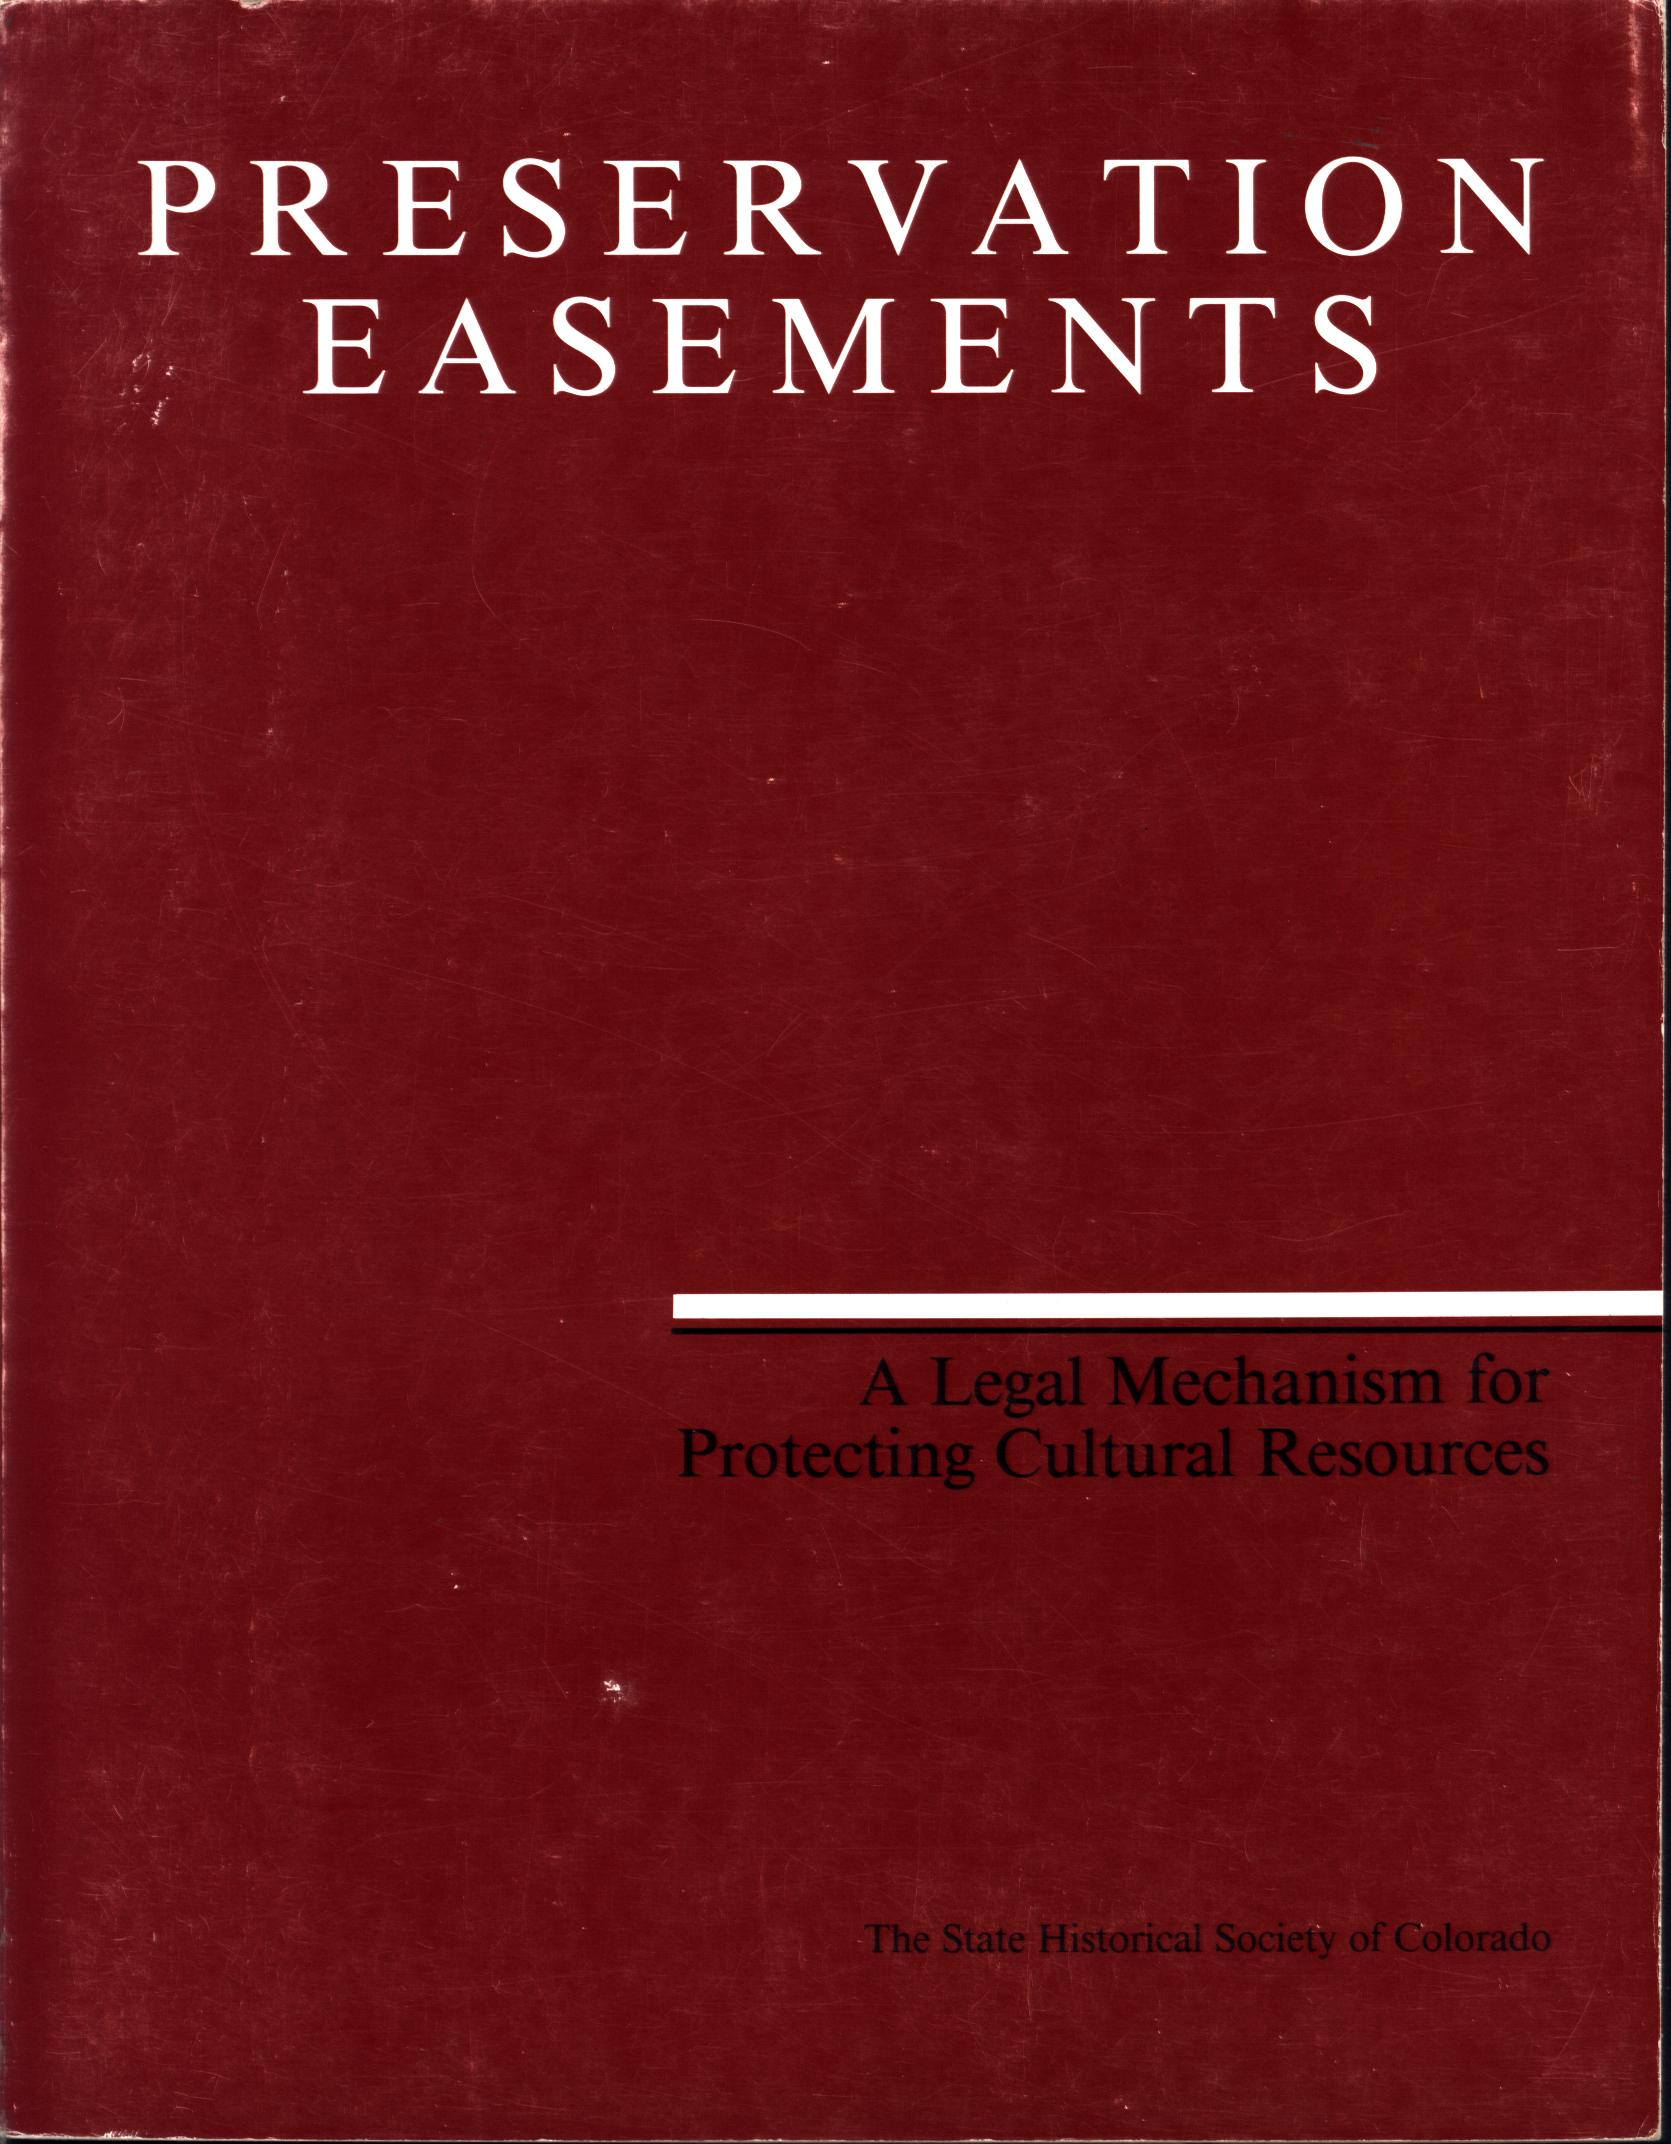 PRESERVATION EASEMENTS: a legal mechanism for protecting cultural resources.